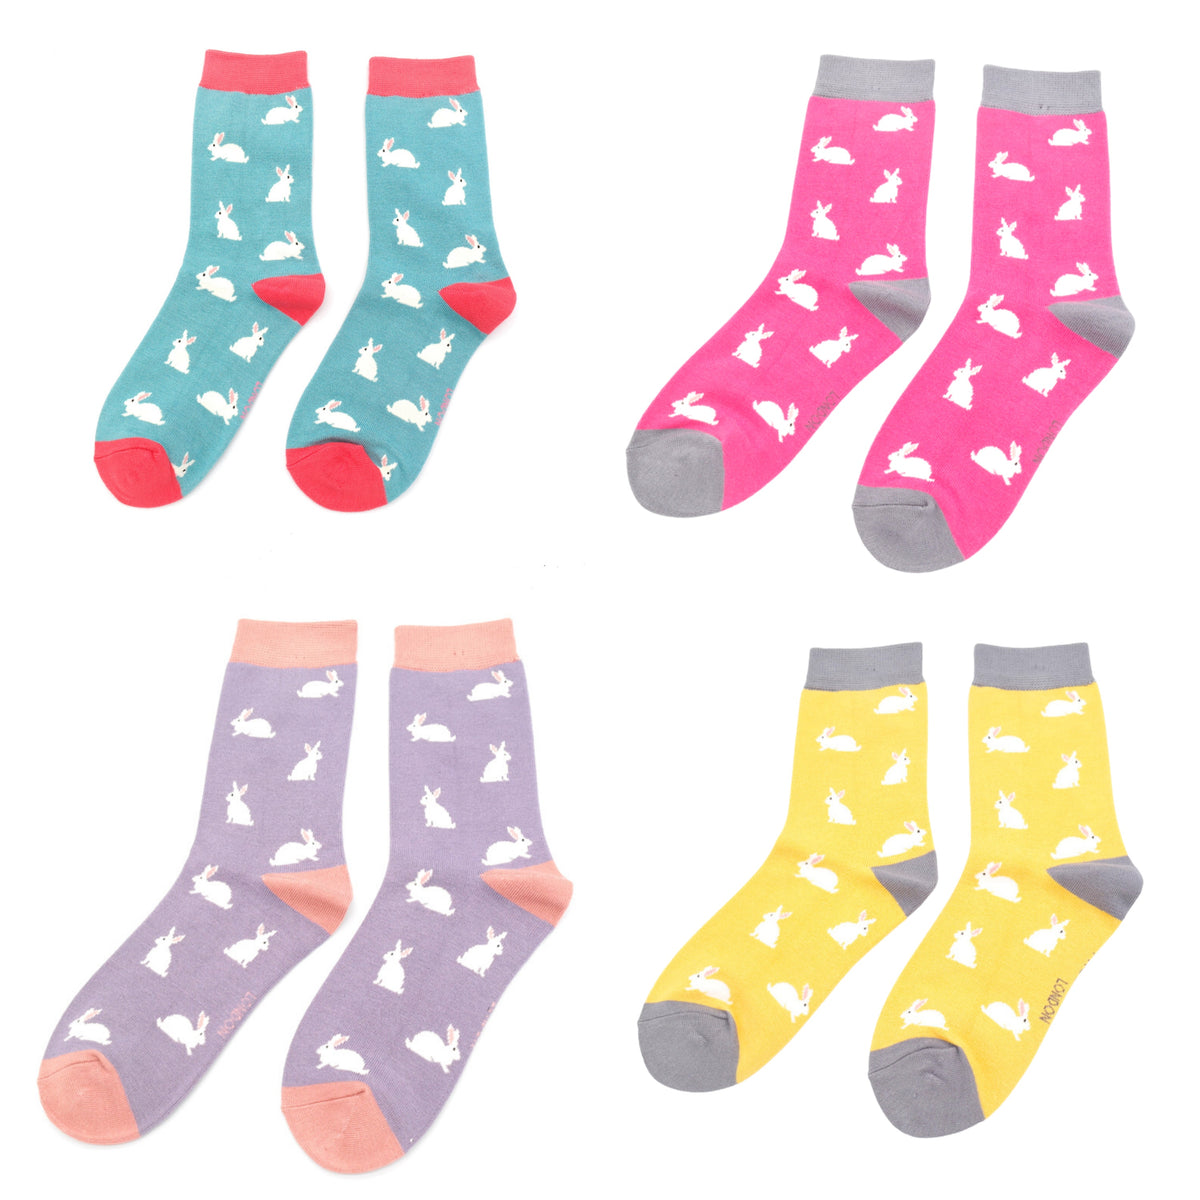 Miss Sparrow Bamboo Socks for Women - Rabbits Composite